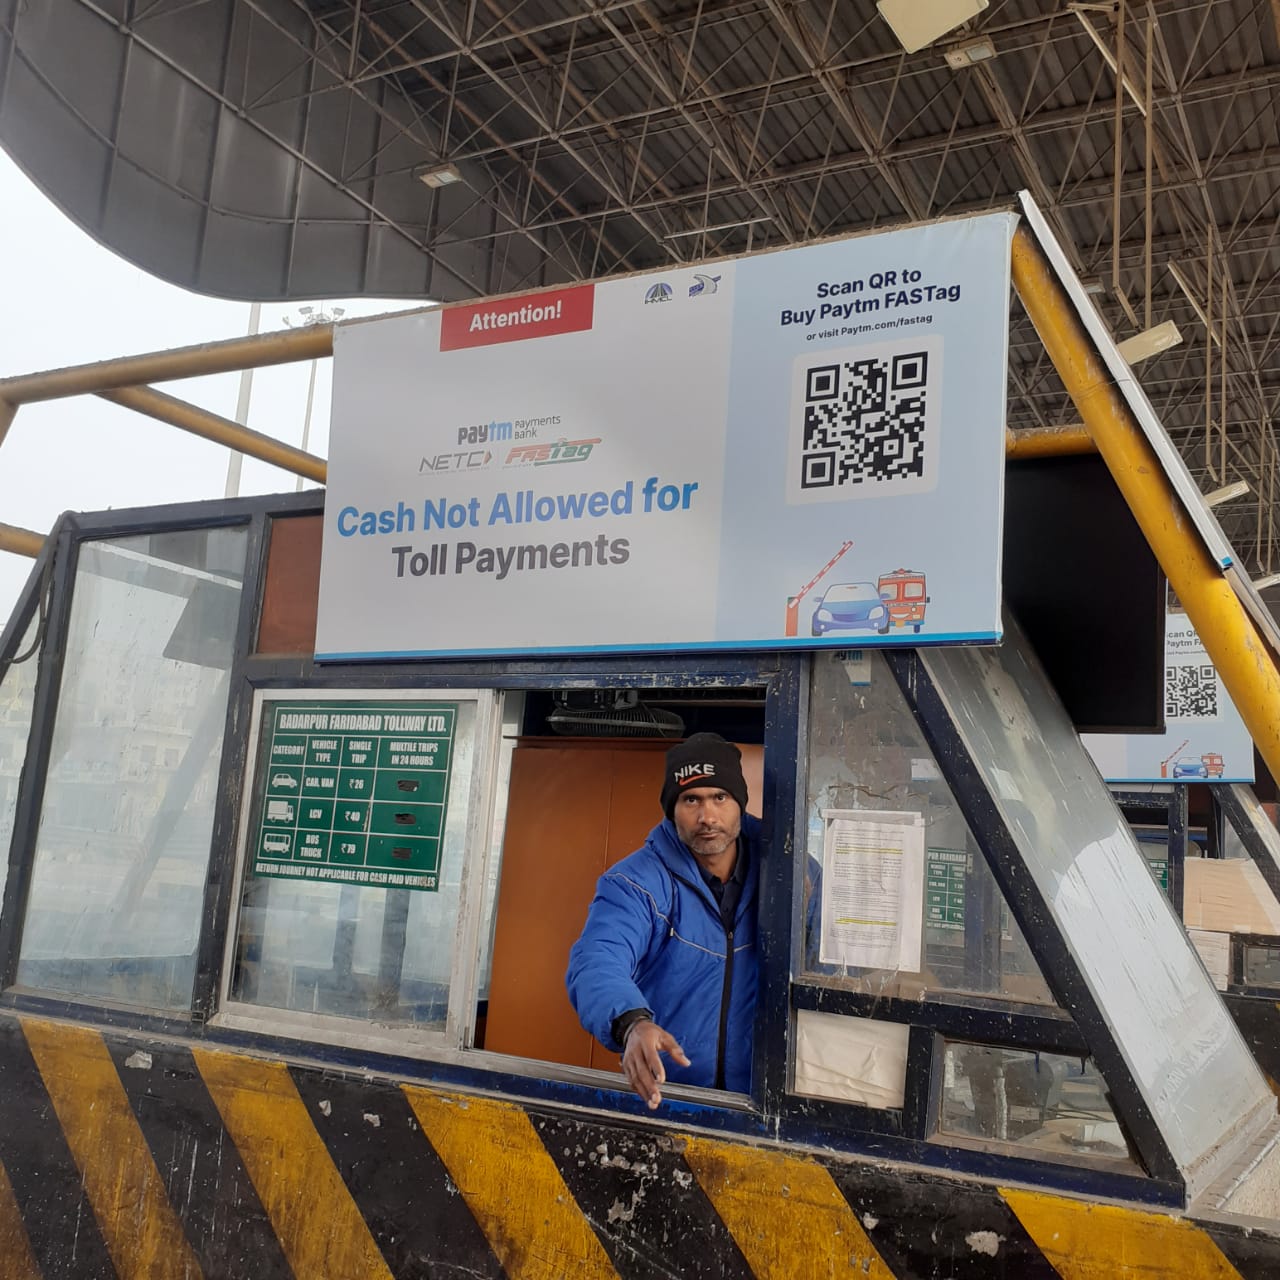 paytm-payments-bank-launches-indias-first-fastag-based-metro-parking-facility-leads-digitization-of-parking-sites-in-the-country